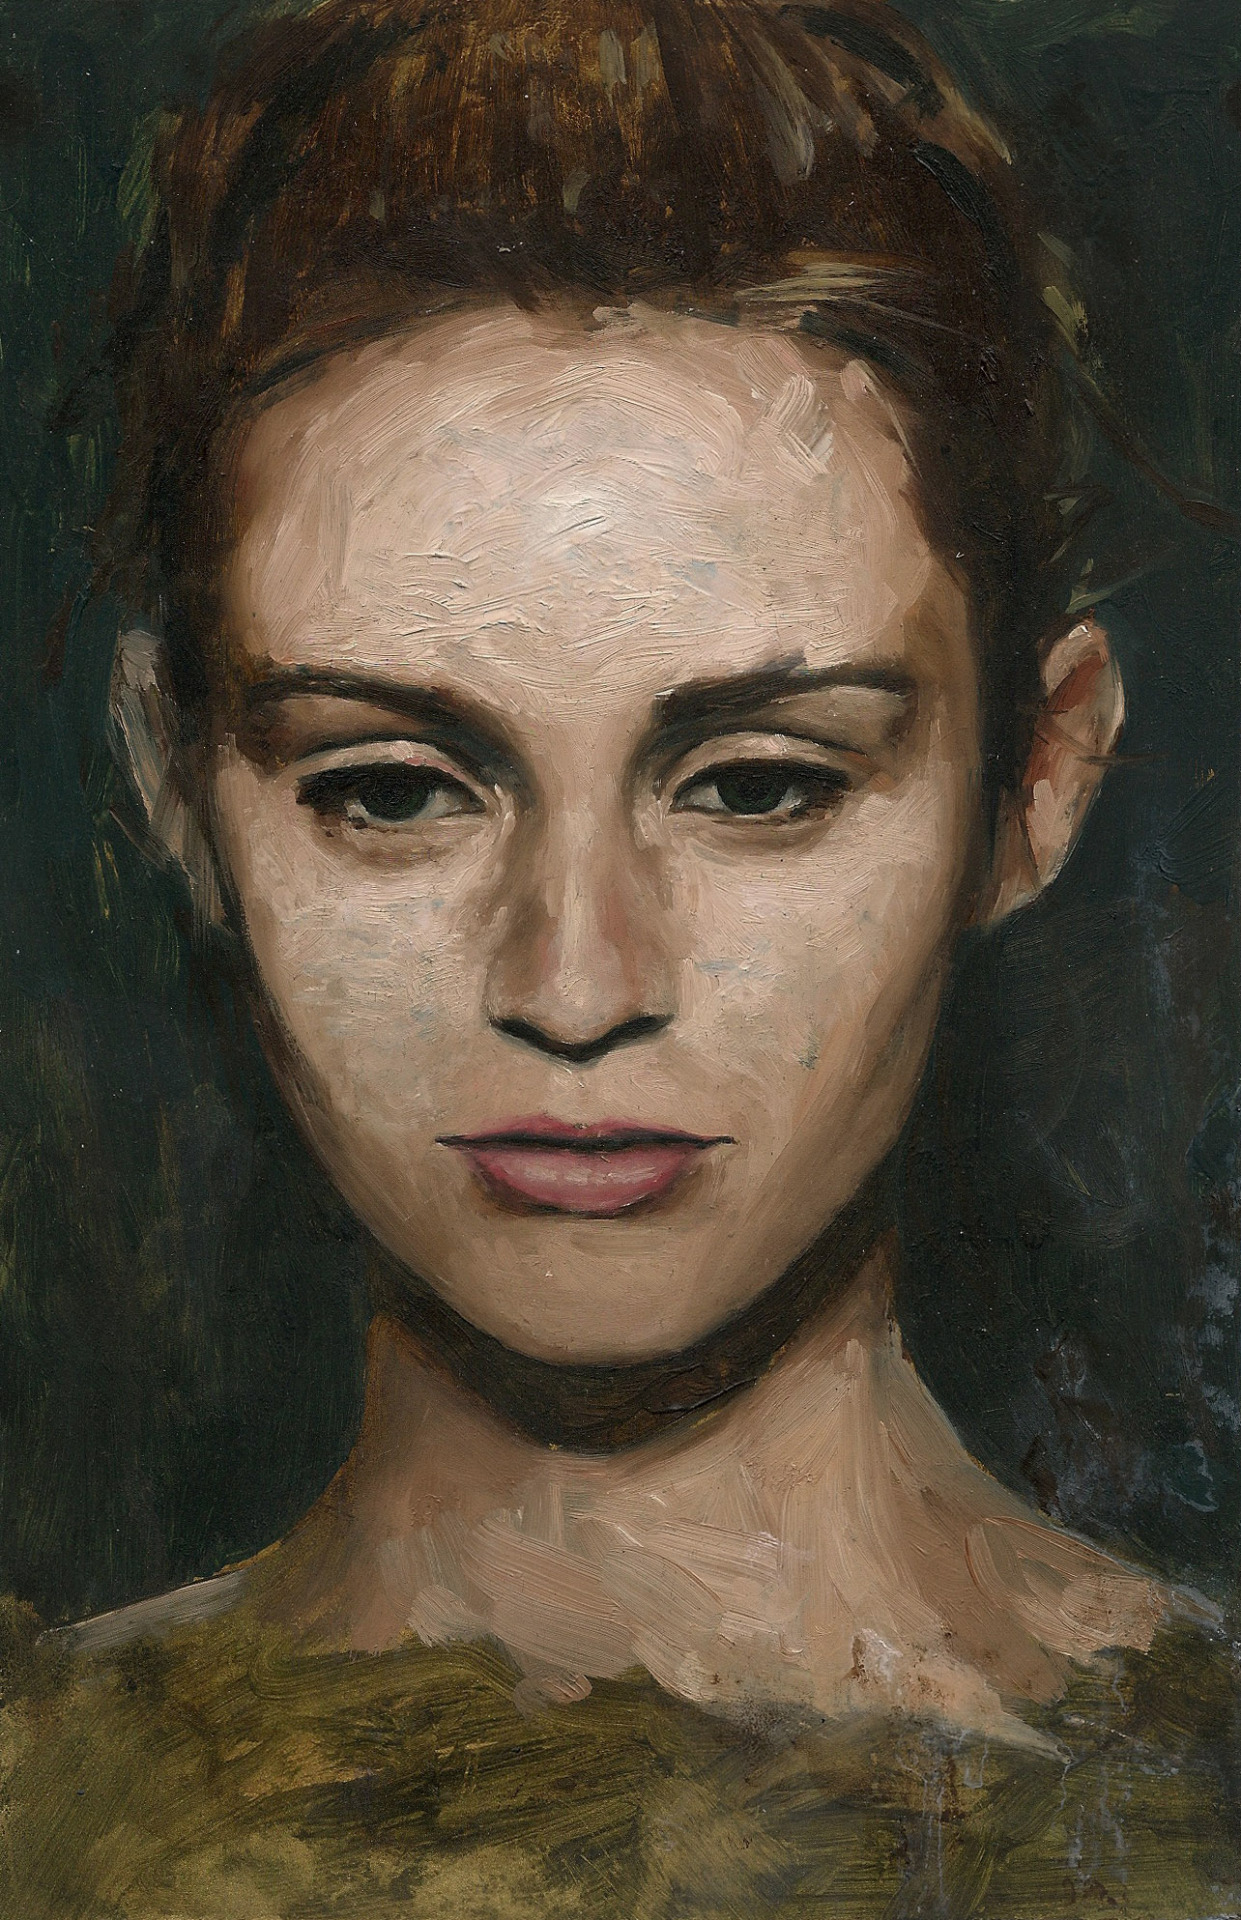 Maddie, 6 ½ x 10 inches, Oil on Panel. Small head study of model Maddie Kulicka.